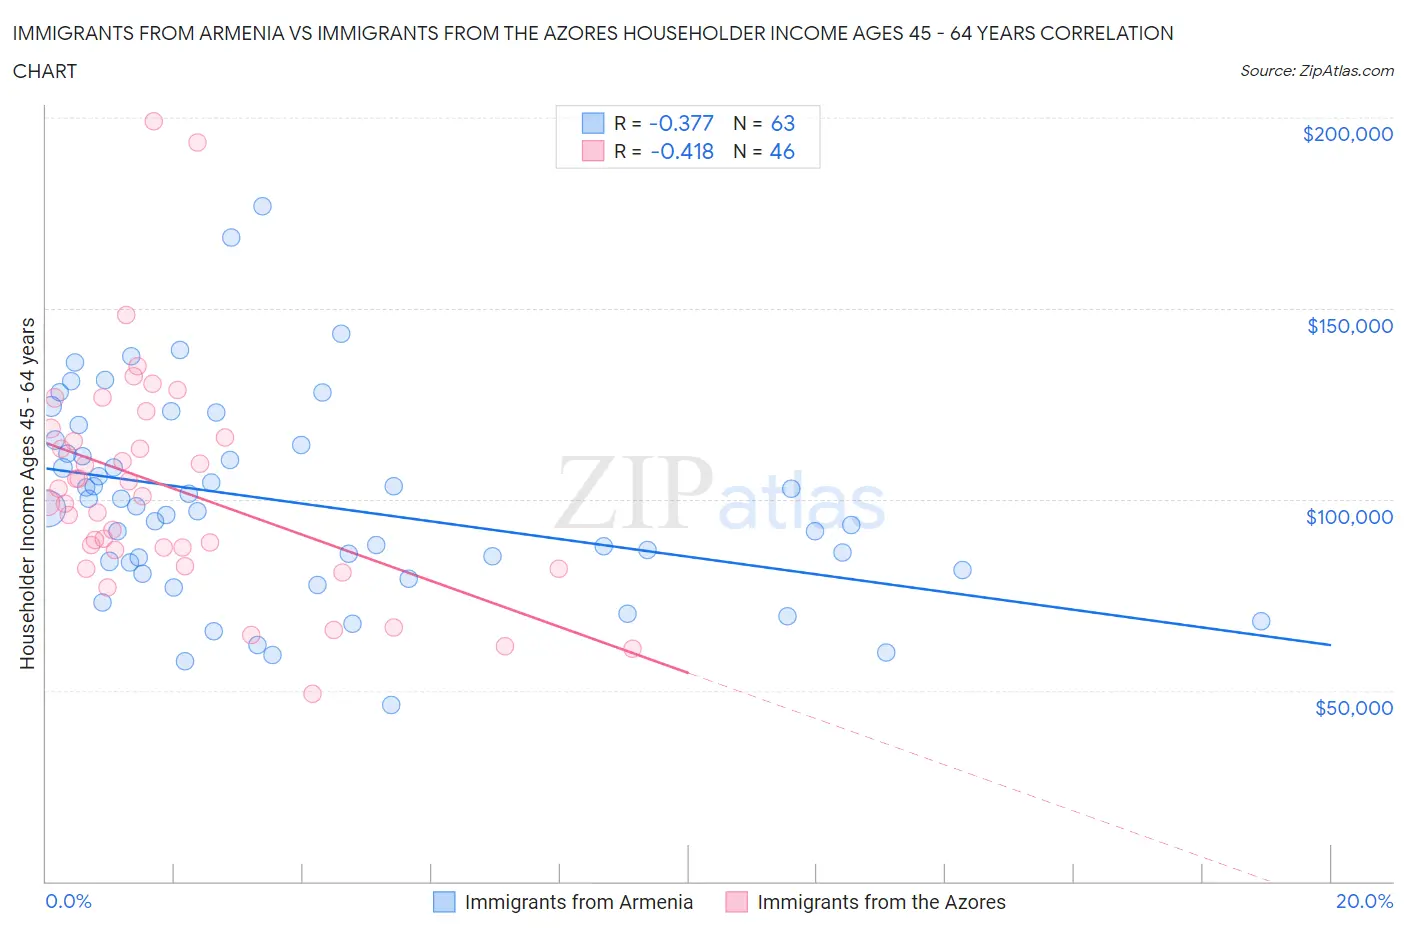 Immigrants from Armenia vs Immigrants from the Azores Householder Income Ages 45 - 64 years